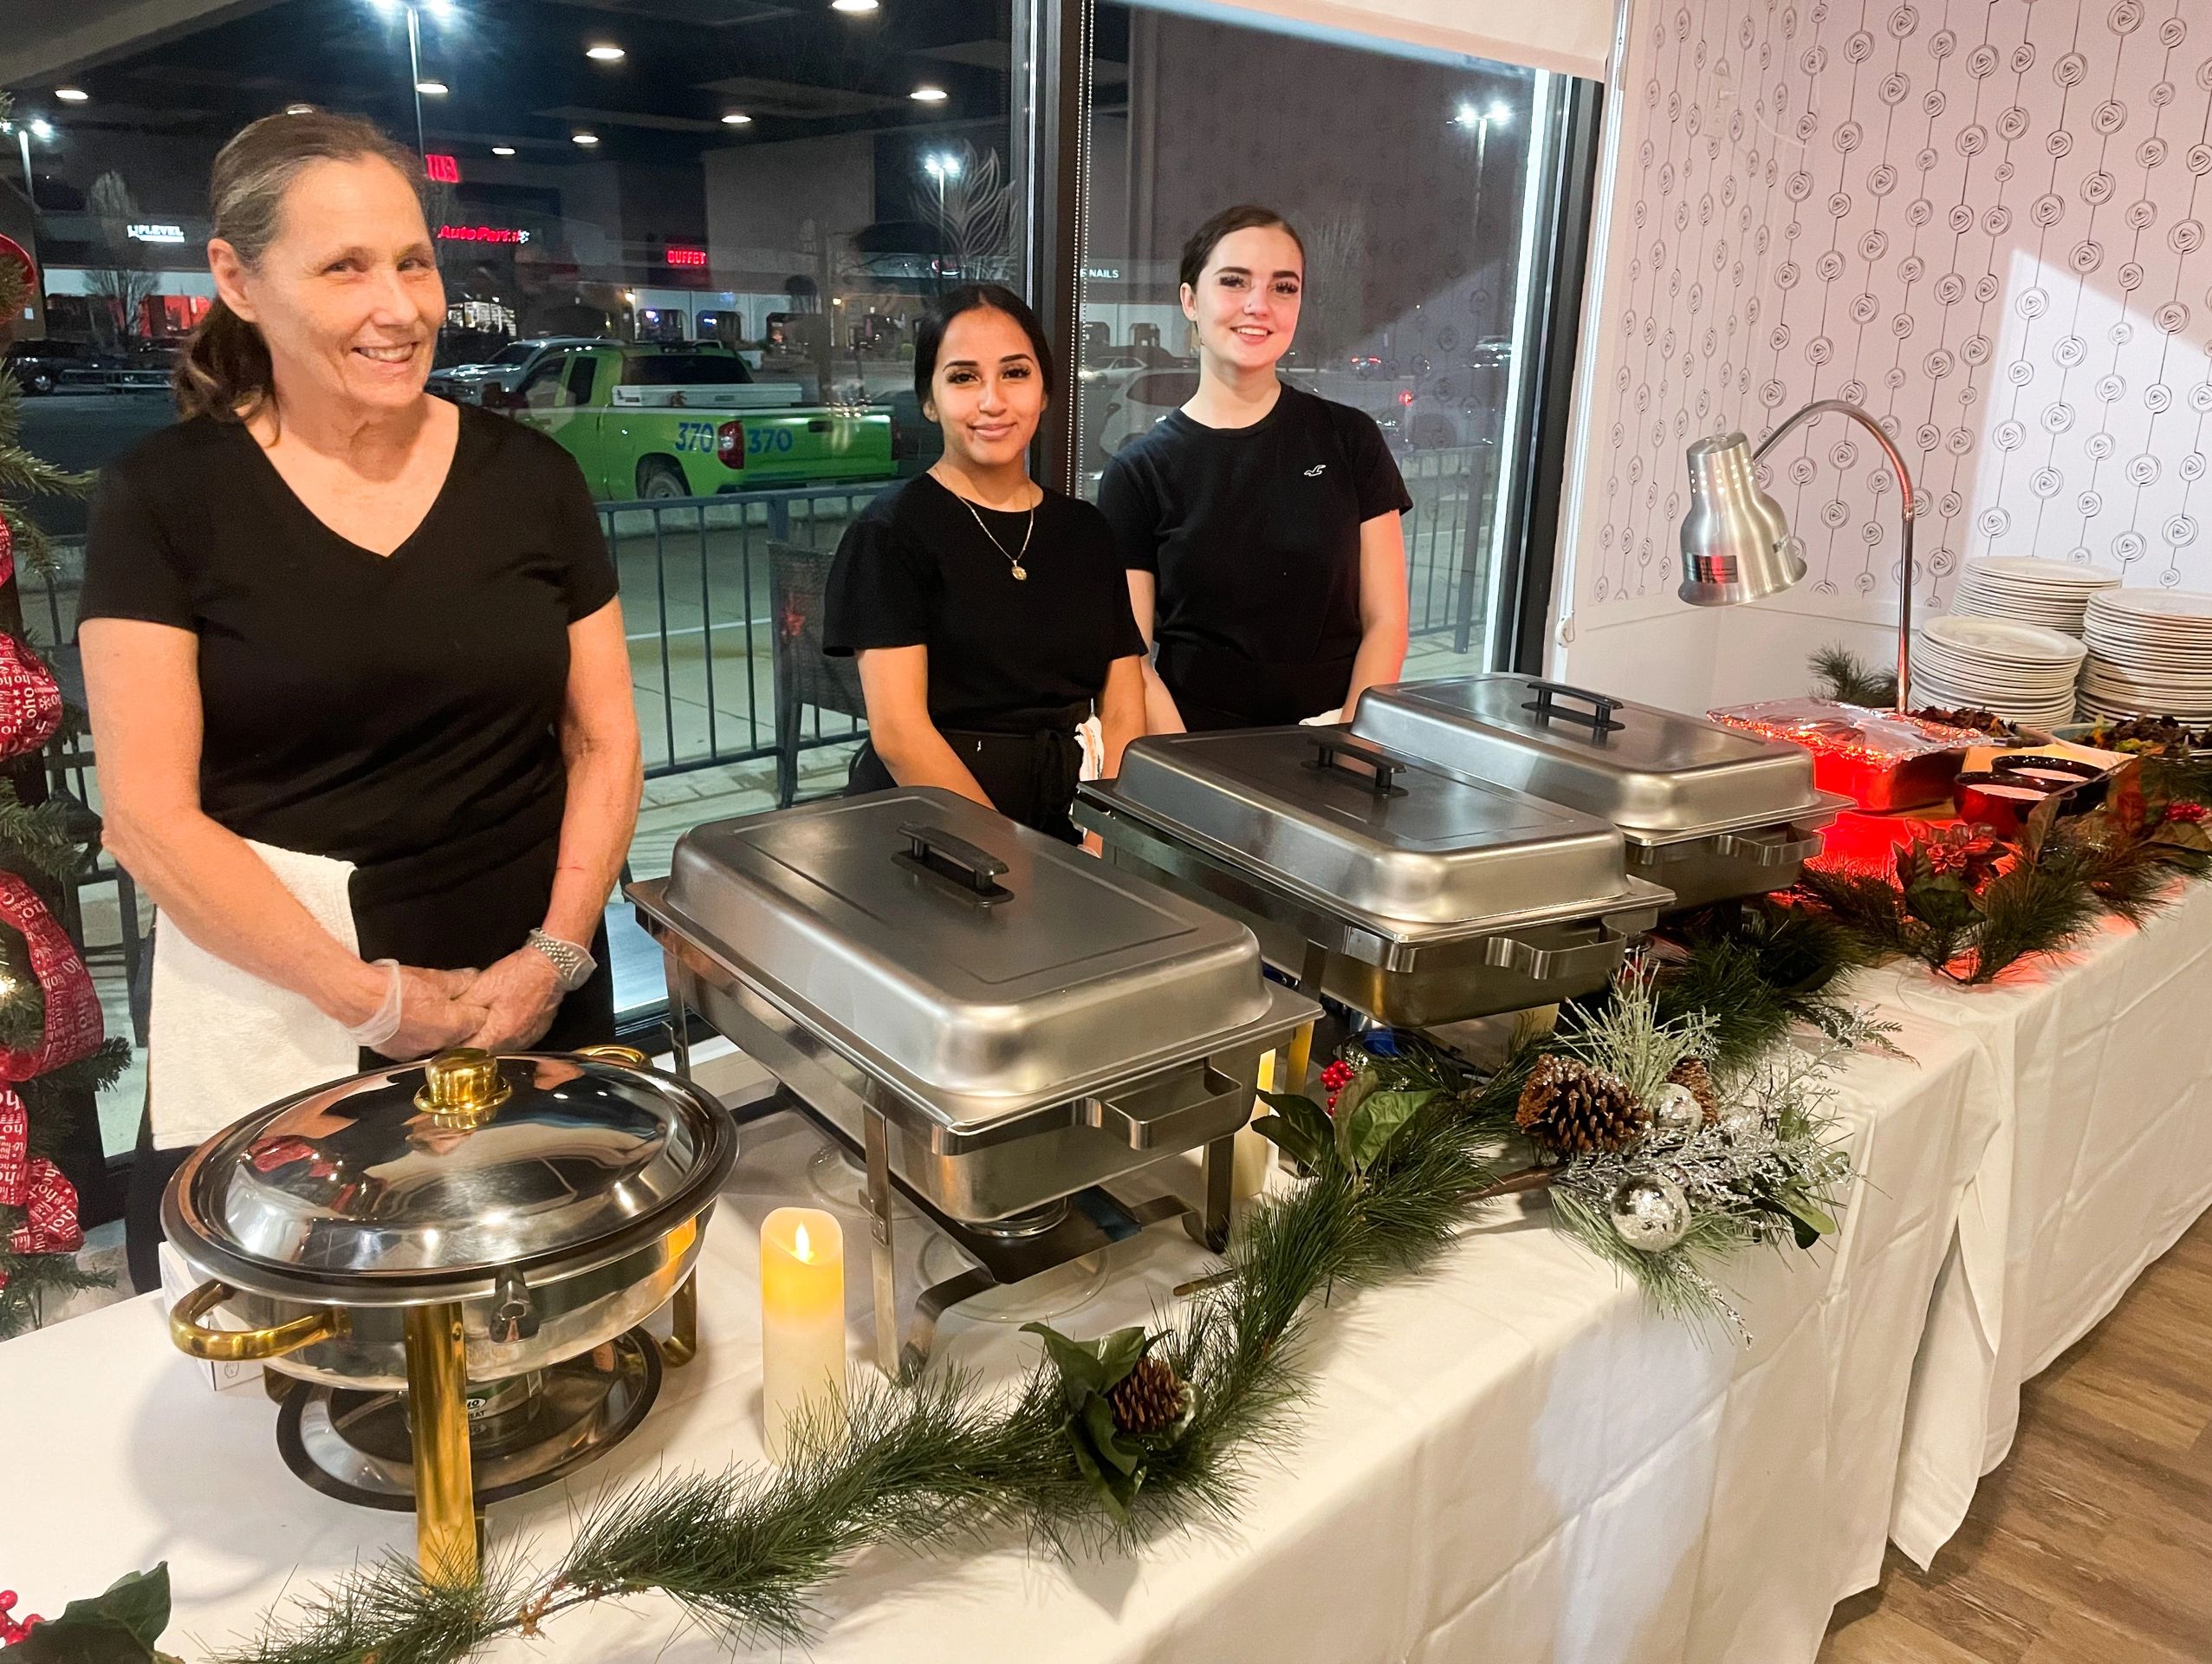 Waxhaw Social Servers serving food to guests at Holiday Party. 